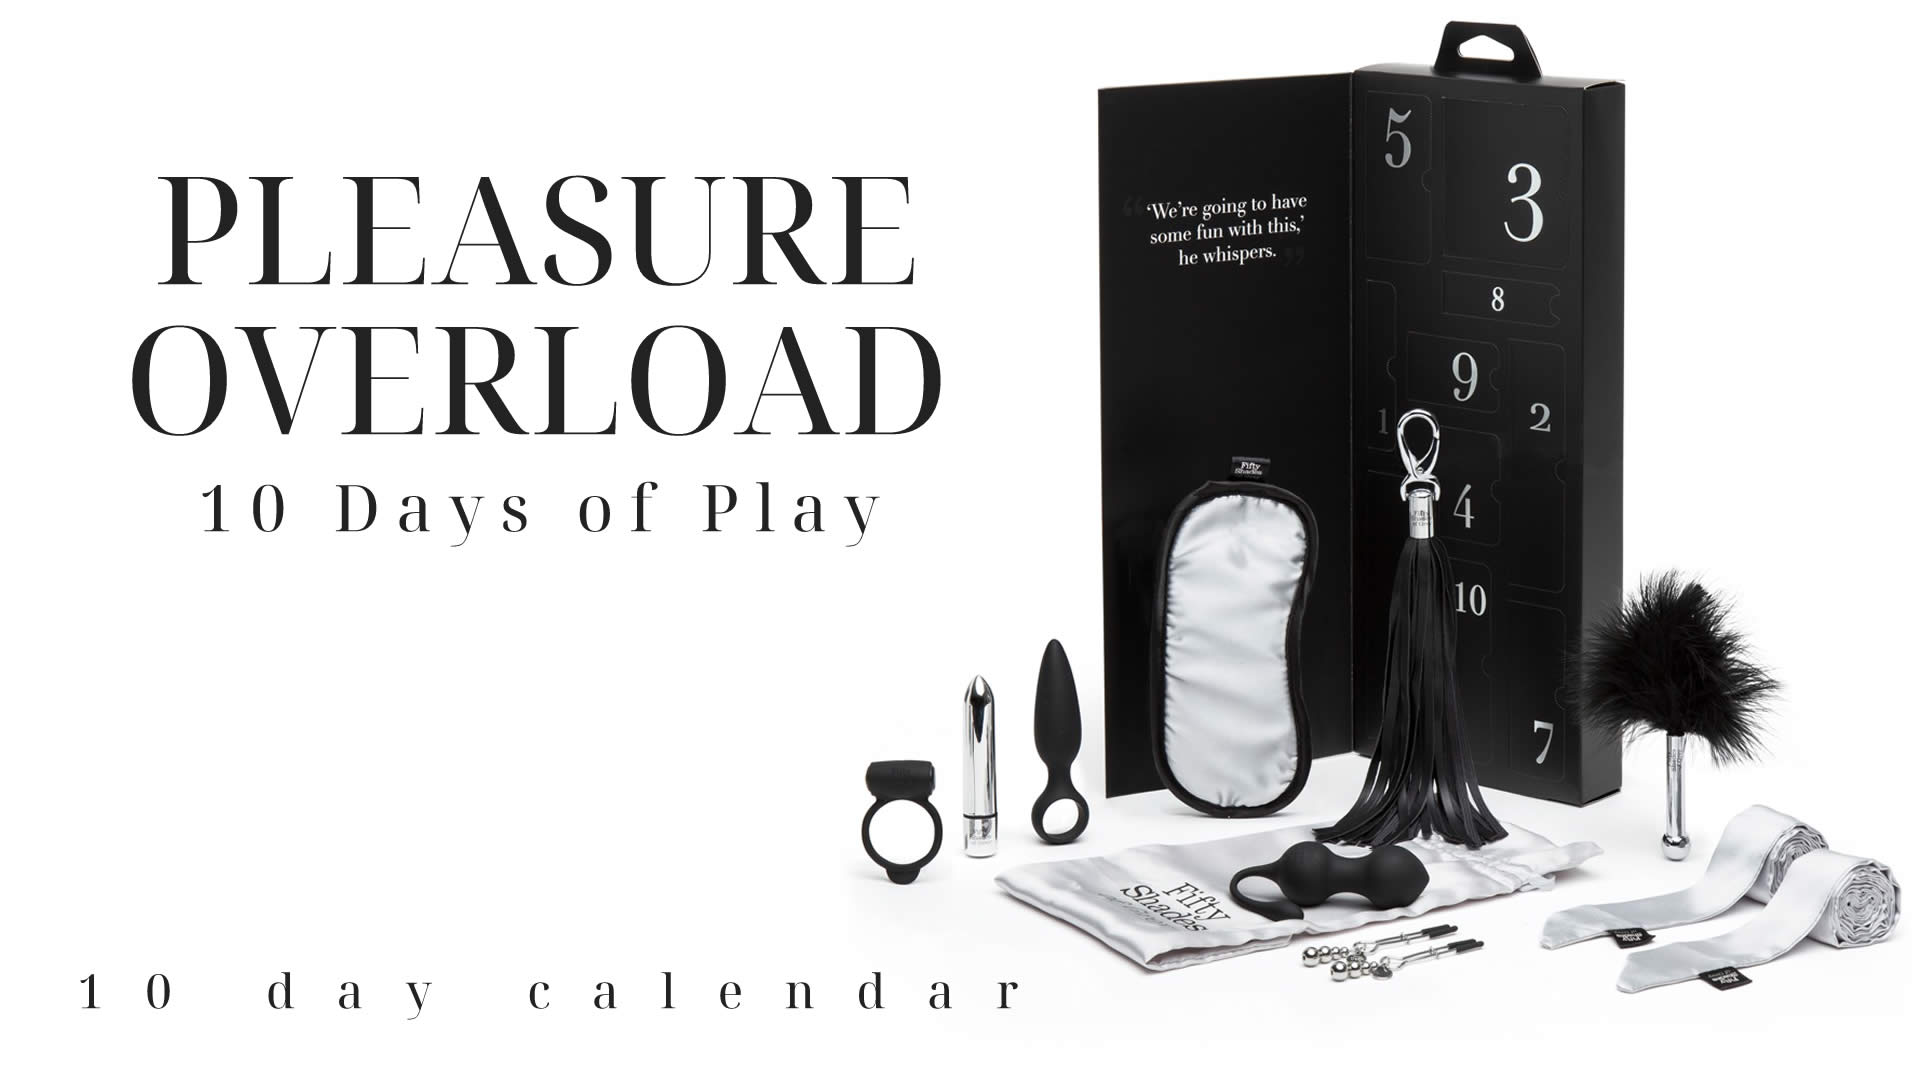 Pleasure Overload Surprise Calendar from Fifty Shades of Grey